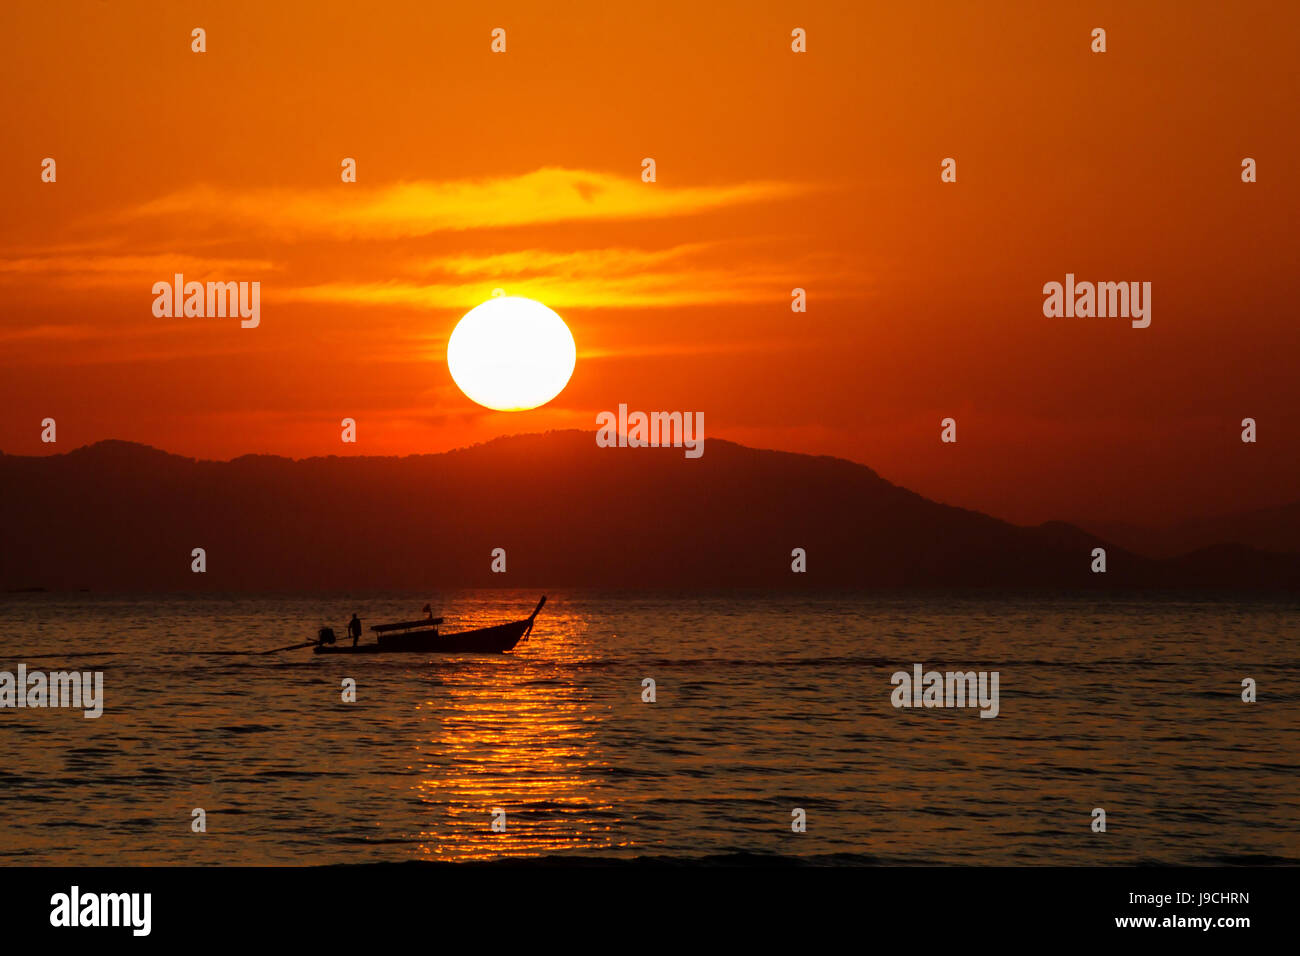 sunset at Railay Beach Krabi Province Thailand with a long boat silhouette and a large round sun setting Stock Photo